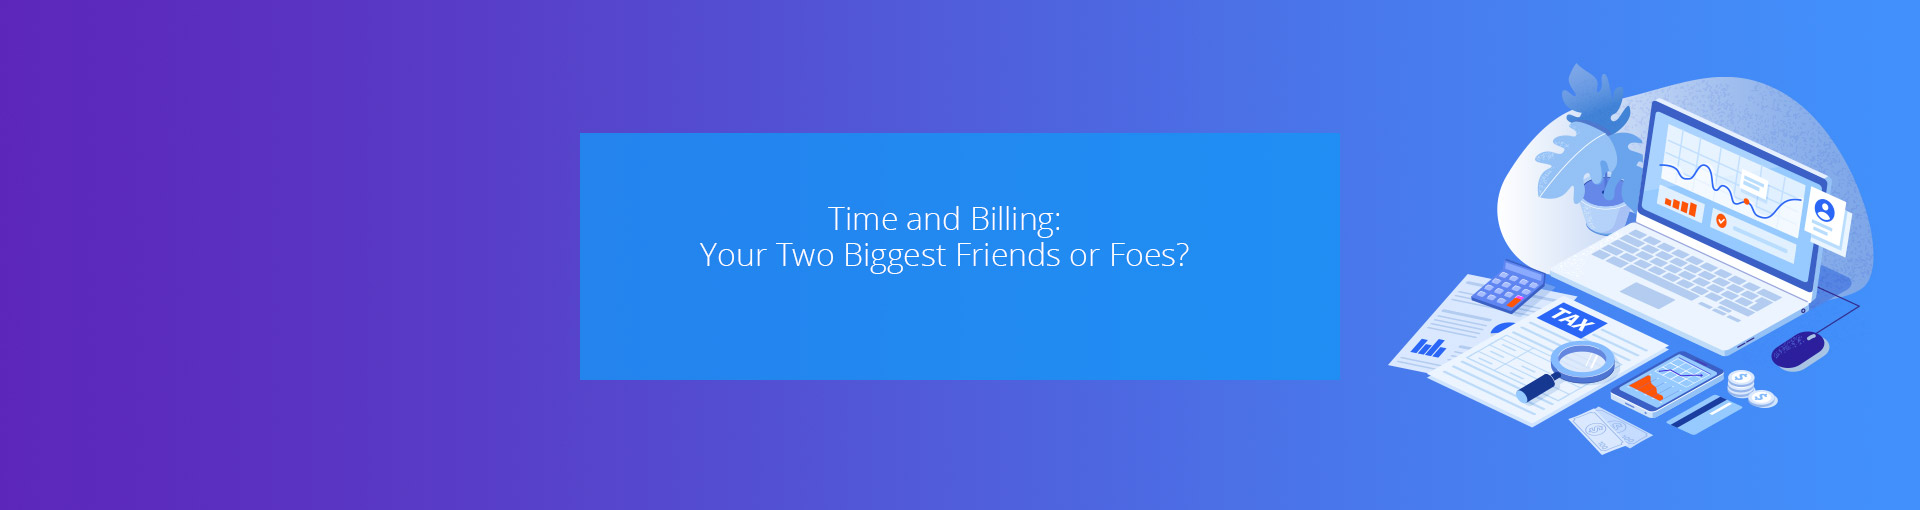 Time and Billing: Your Two Biggest Friends or Foes? Featured Image